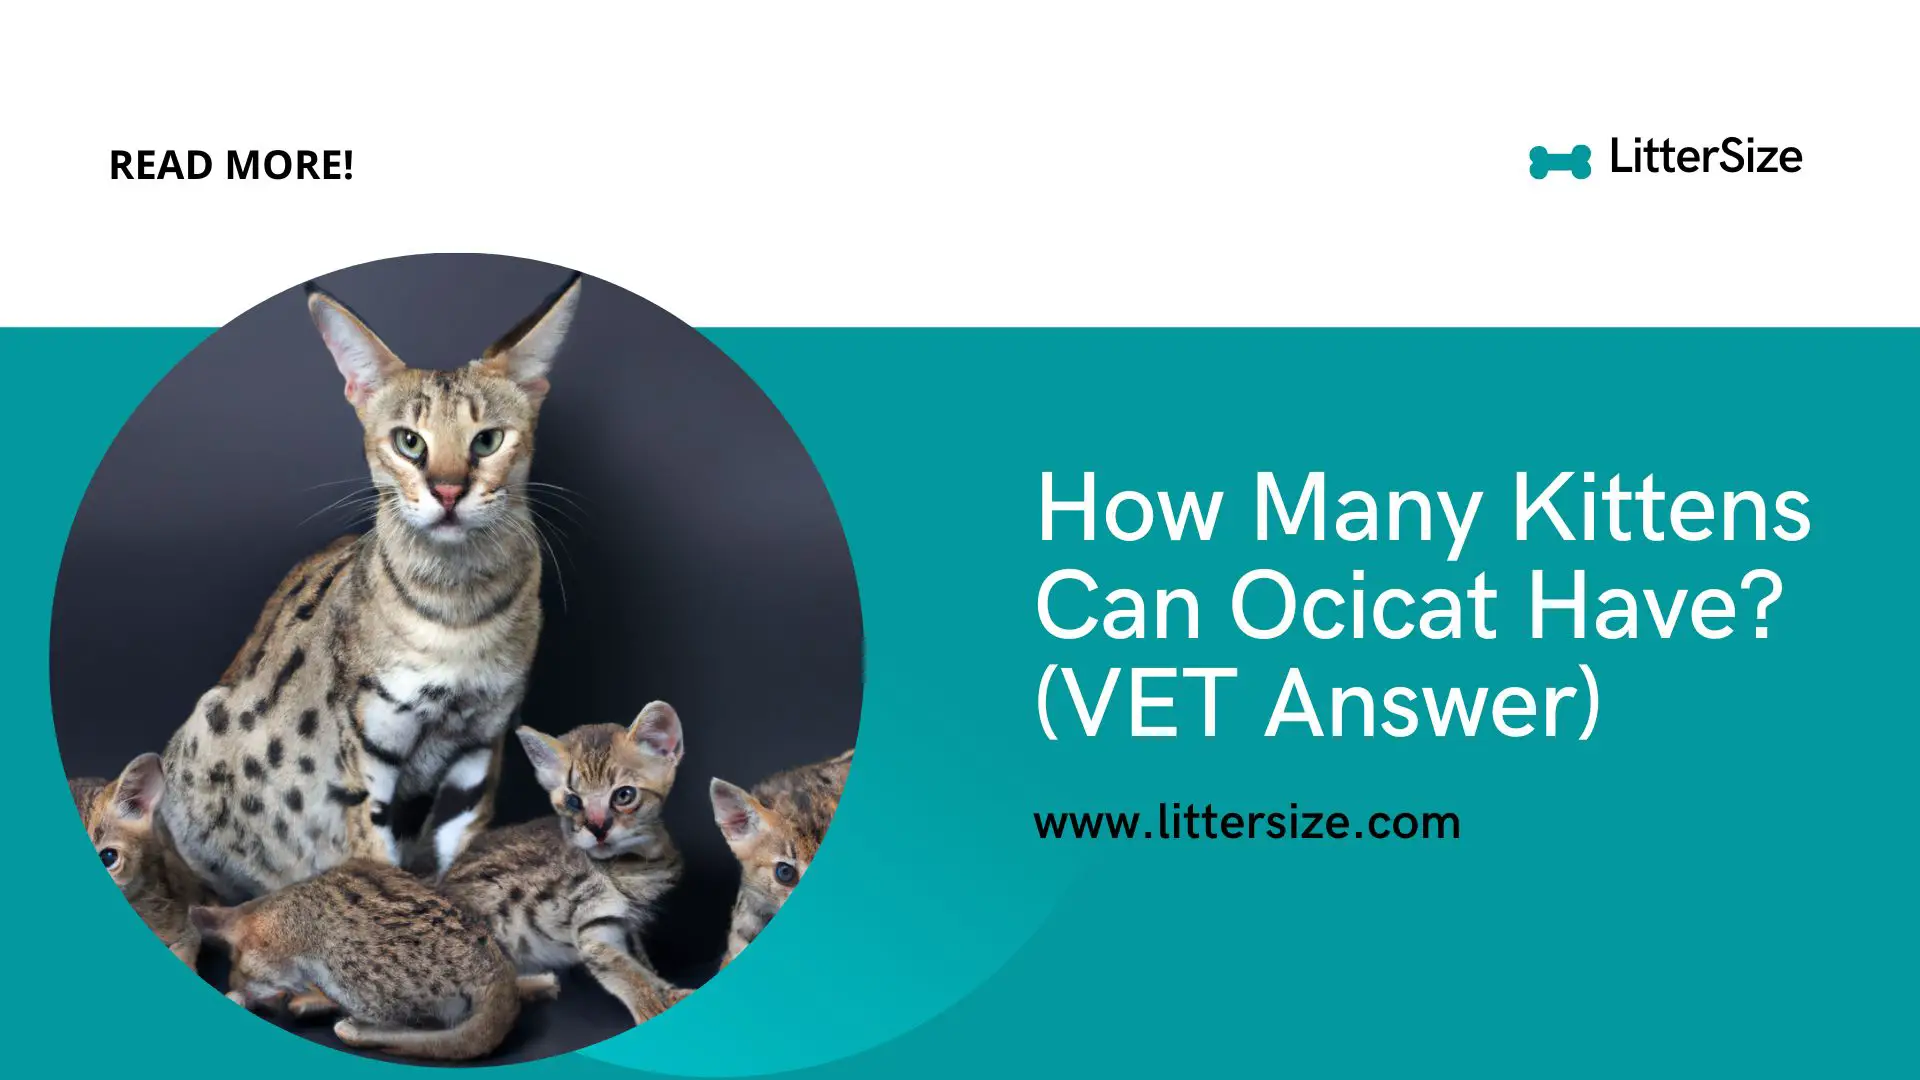 How Many Kittens Can Ocicat Have? (VET Answer)